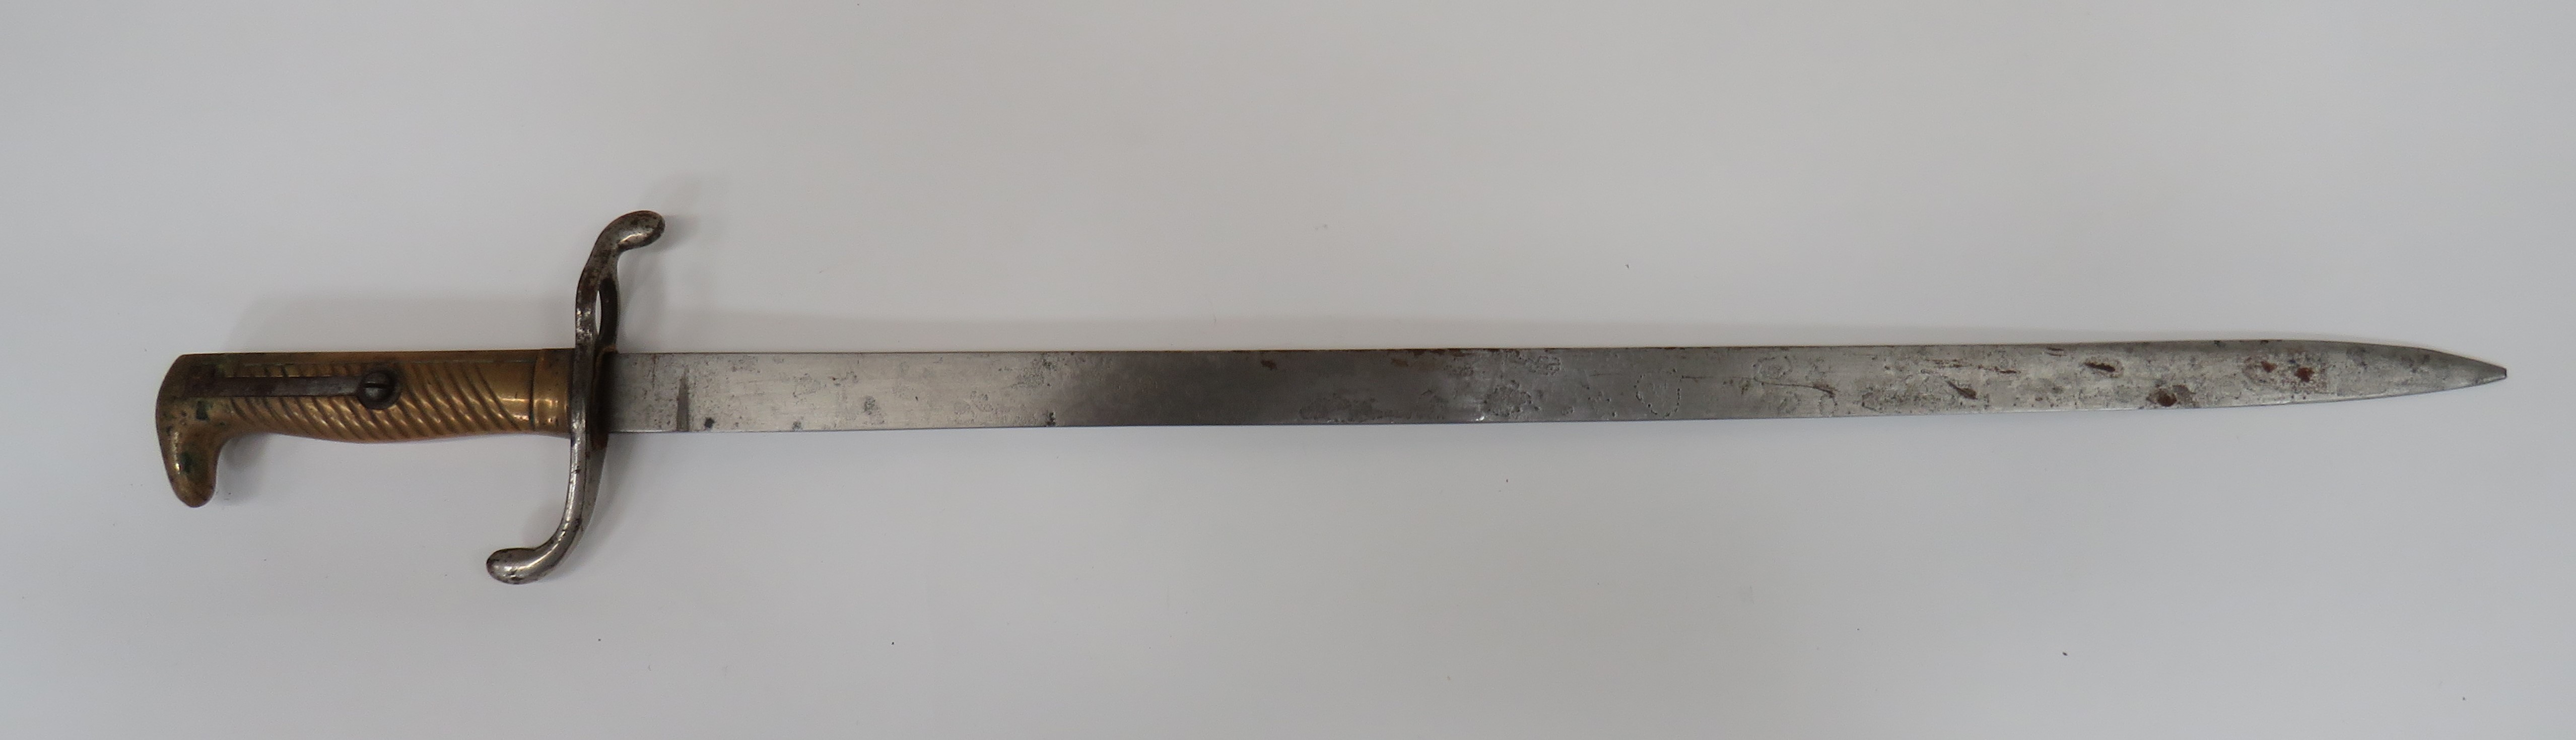 1871 Style Dress Bayonet With Etched Blade 19 1/2 inch, single edged blade. Traces of foliage etched